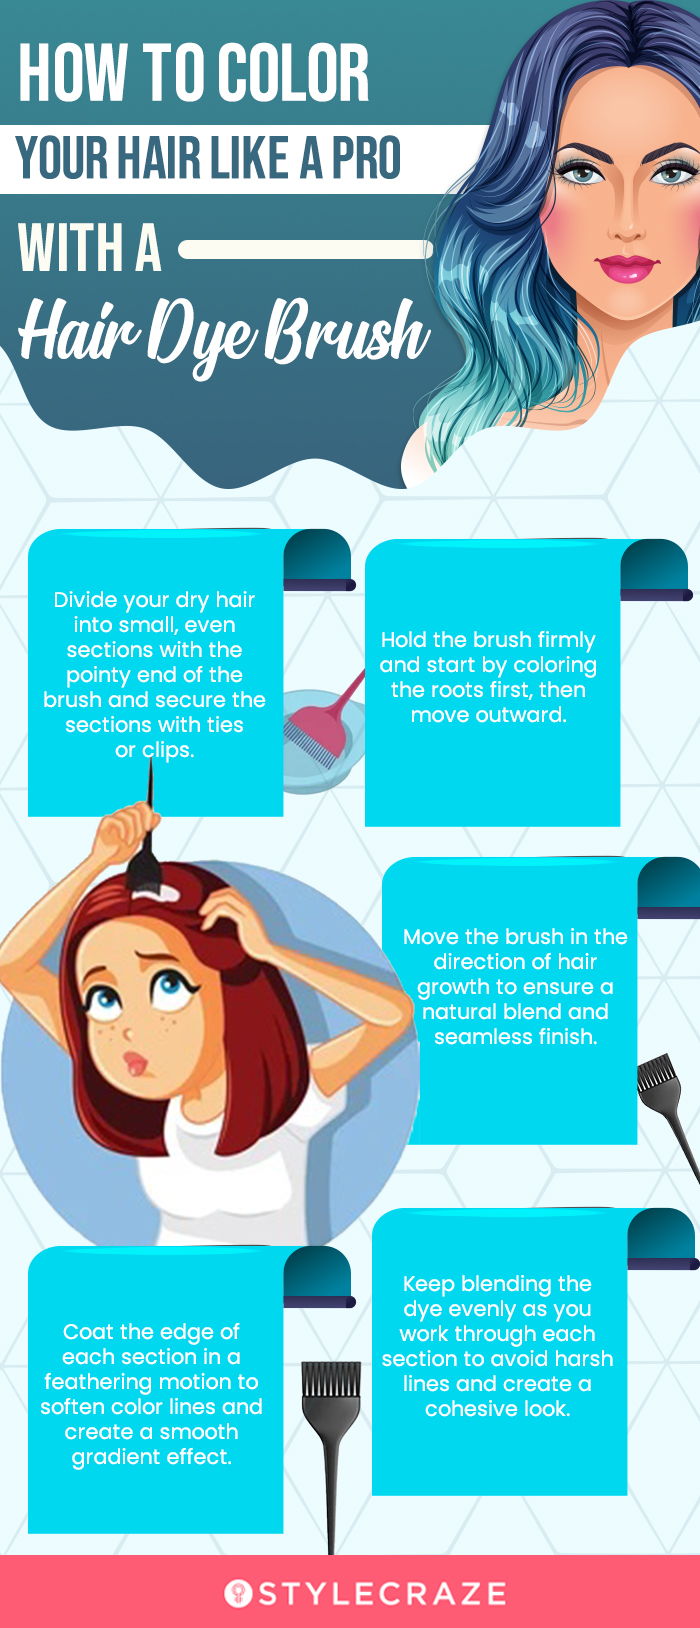  How To Color Your Hair Like A Pro With A Hair Dye Brush (infographic)